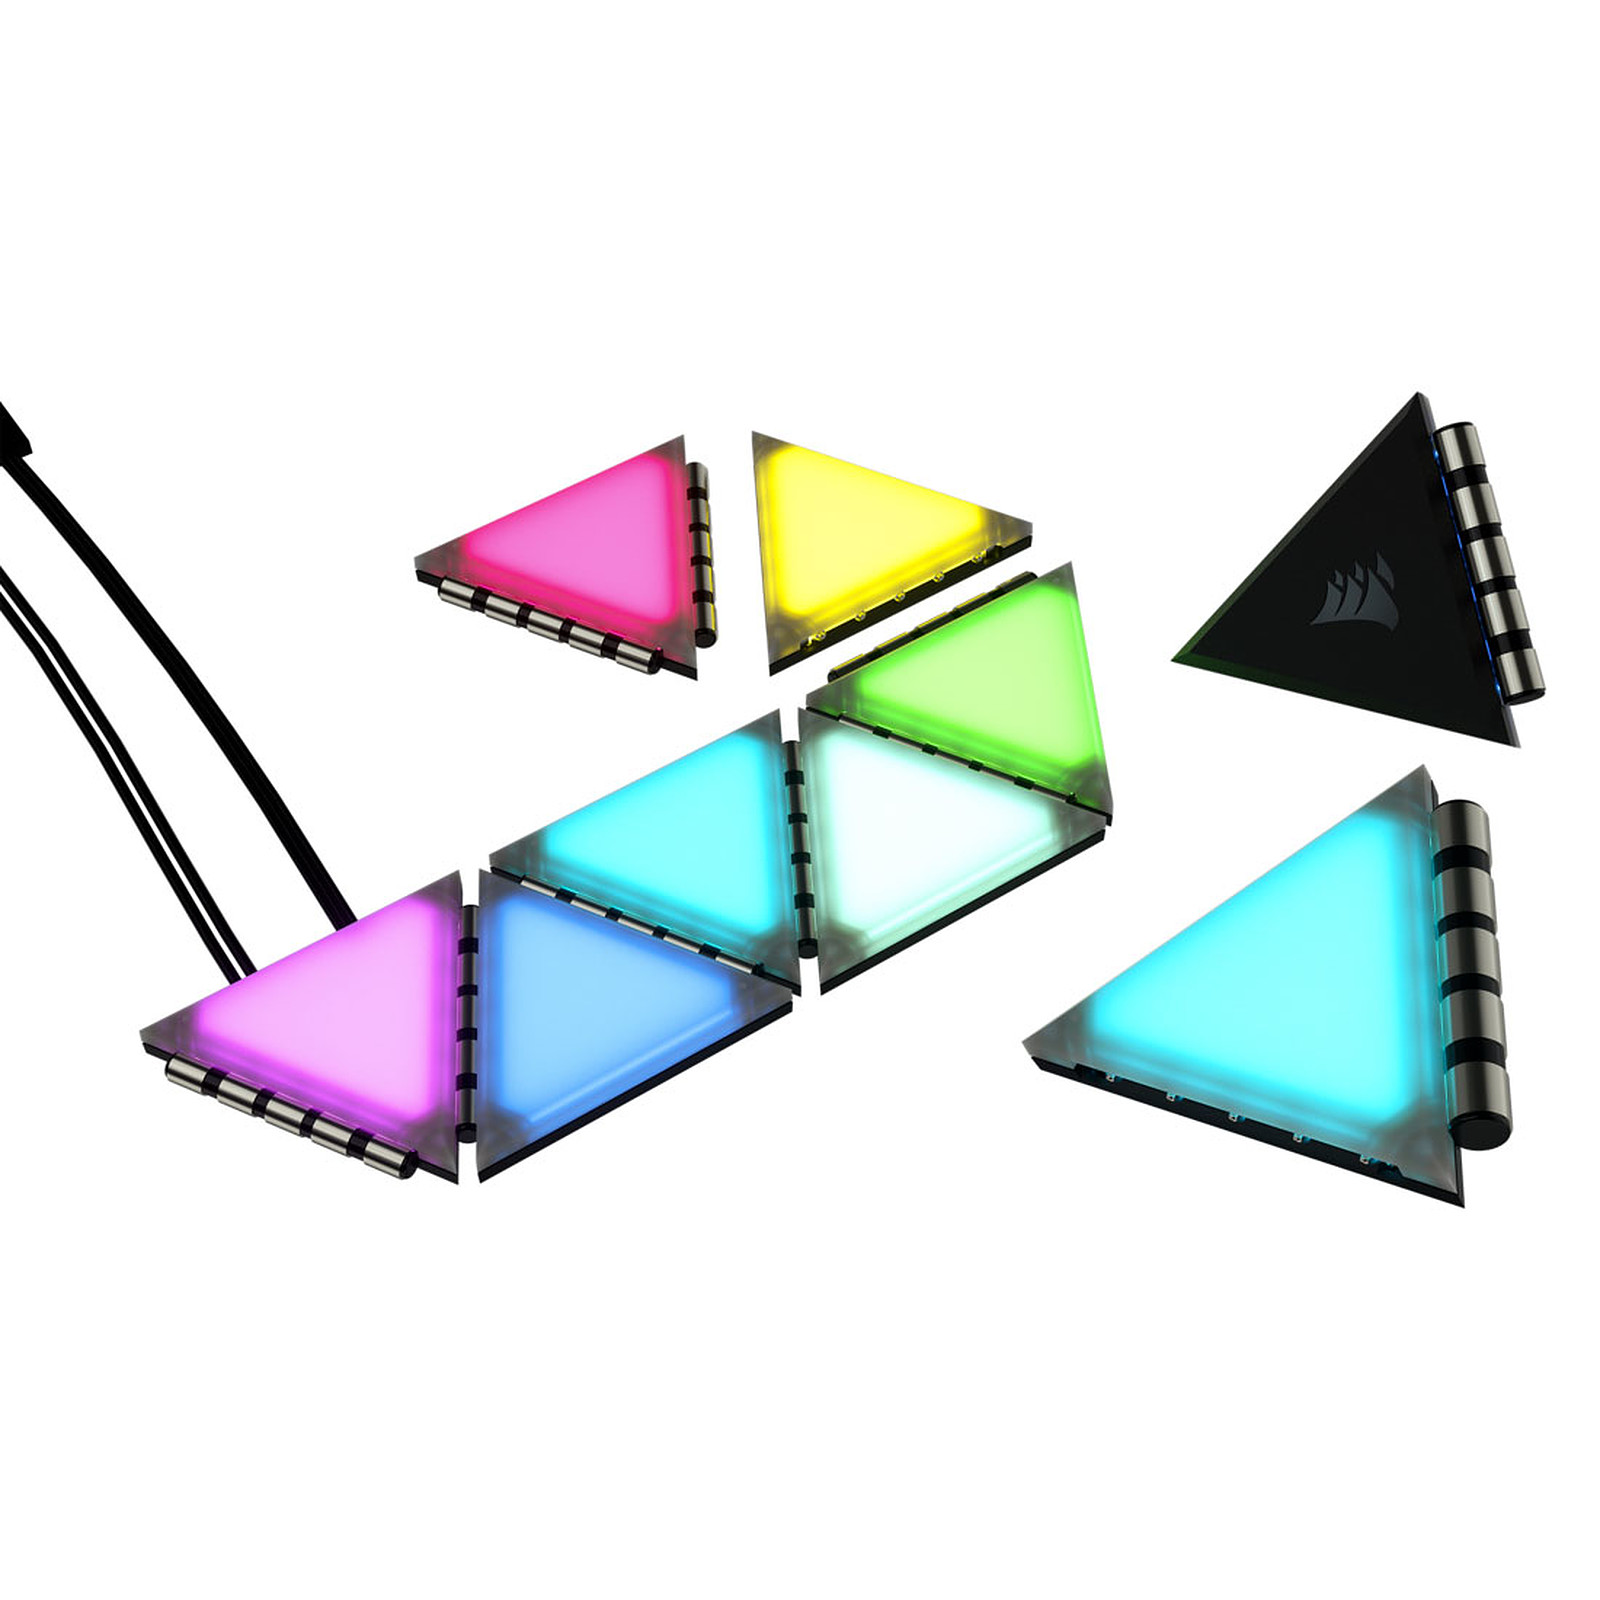 Corsair Cl-9011114 Lc100 Starter Kit – Lighting Node Pro Rgb Lighting Controller + 9x Interconnected Mini Triangle Lighting Panels ( 9 Leds Per Panel ) Upto 18 Magnetic Attachment 8x Included Low-Profile Connectors + 2x Corner Hinges – Compatiable With